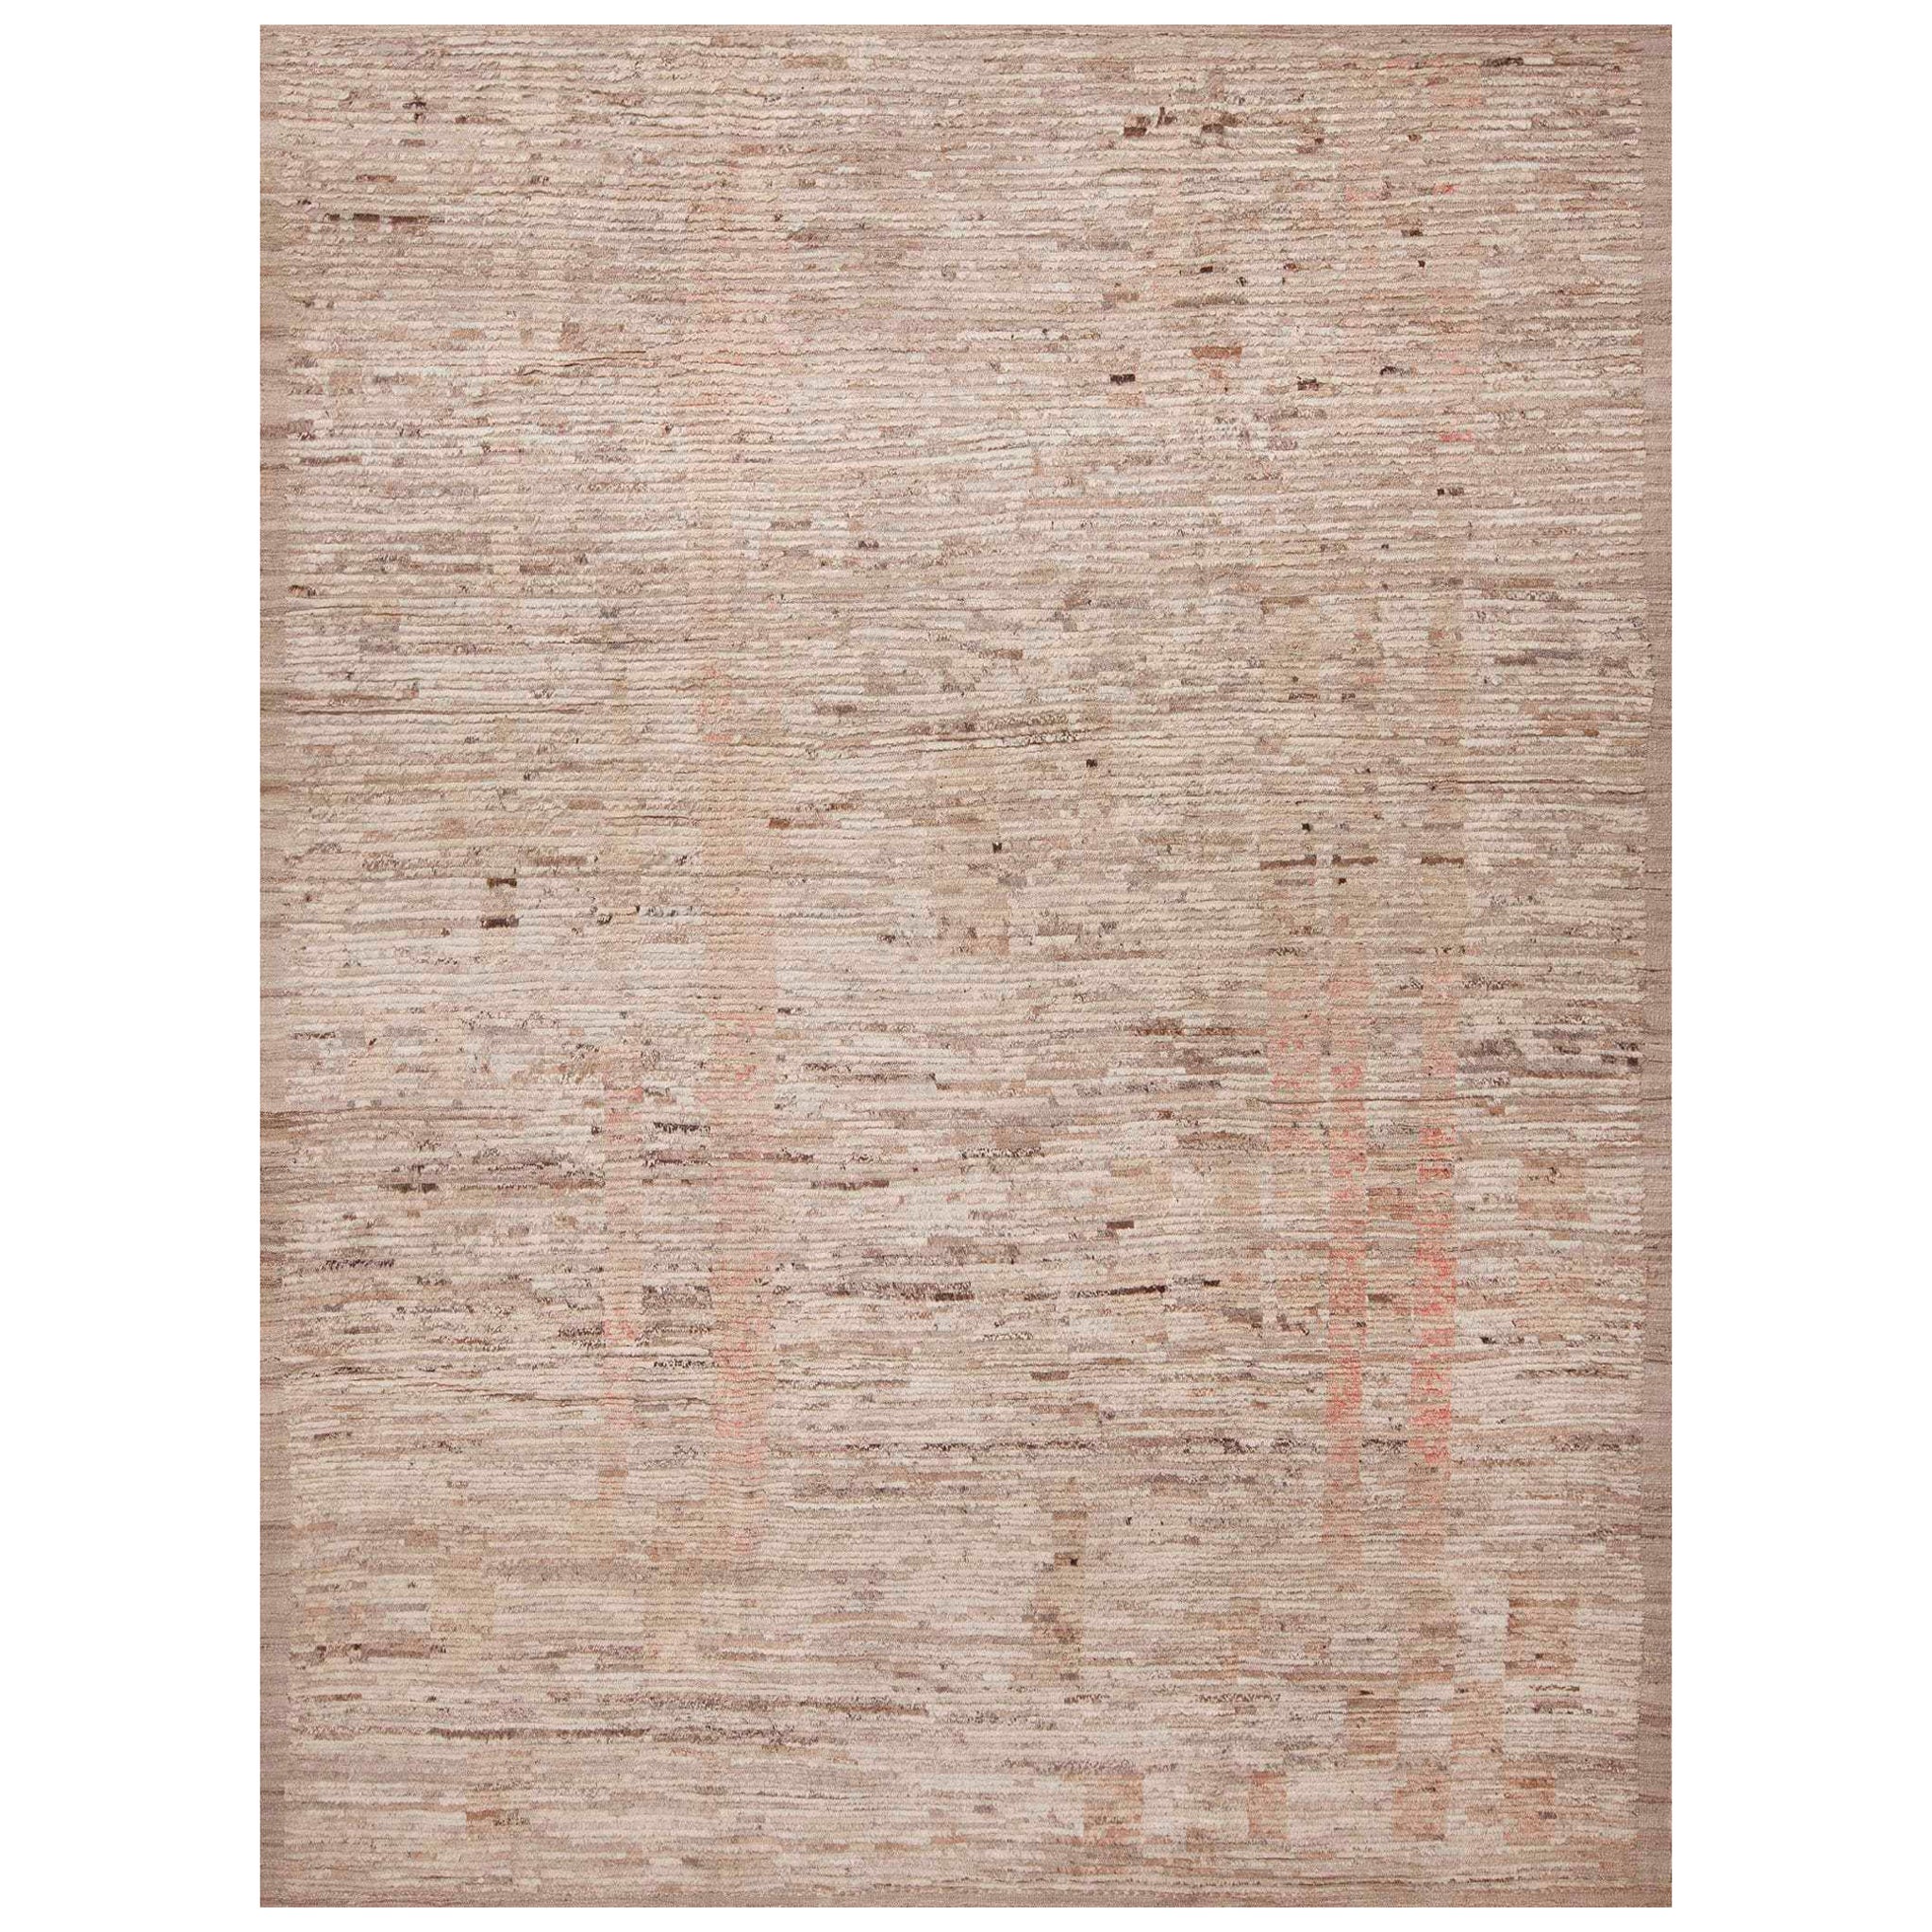 The Collective Moderns Contemporary Area Rug 9'1" x 12'3" (collection Nazmiyal)